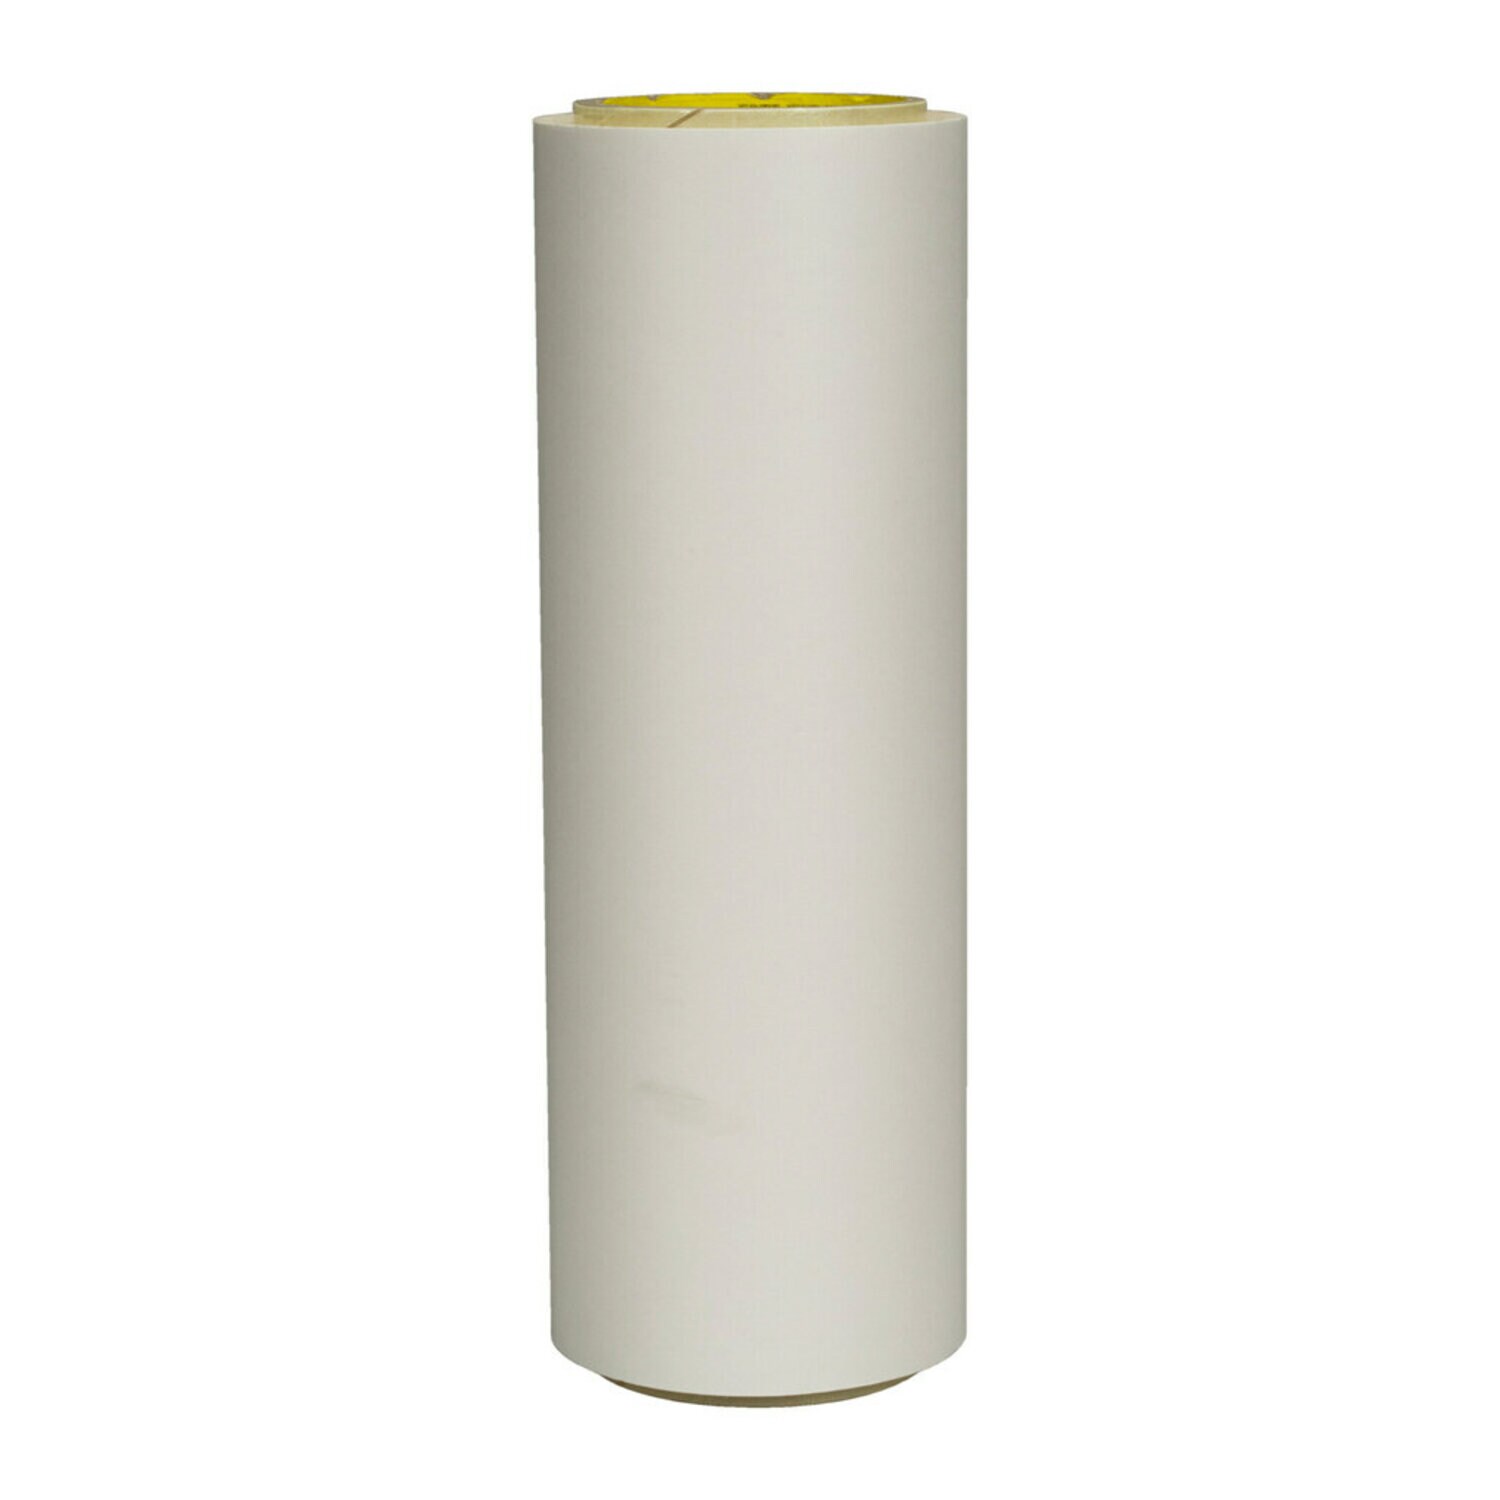 7100009968 - 3M Adhesive Transfer Tape 9775WL, Clear, 5 mil, Roll, Config